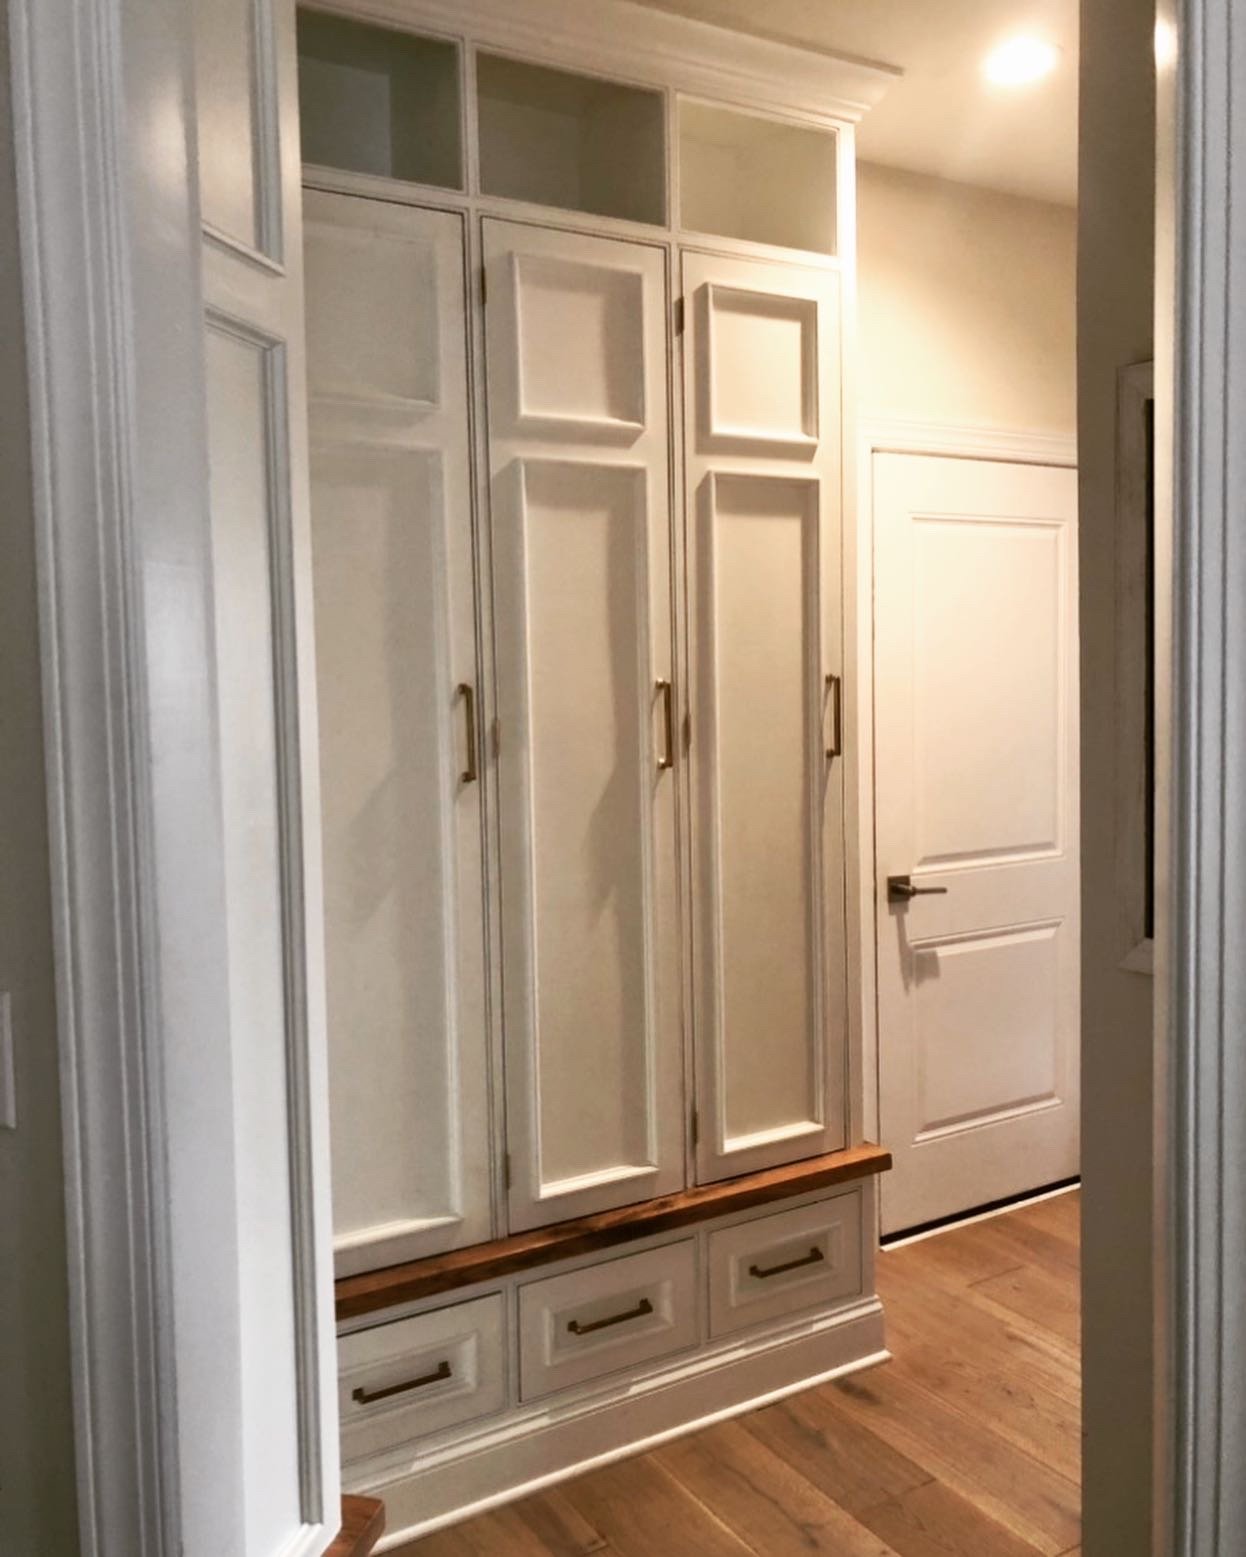  Another shot of the finished product from the kitchen. The raised trim details on the doors and drawer fronts was used to match the nearby kitchen cabinetry.   